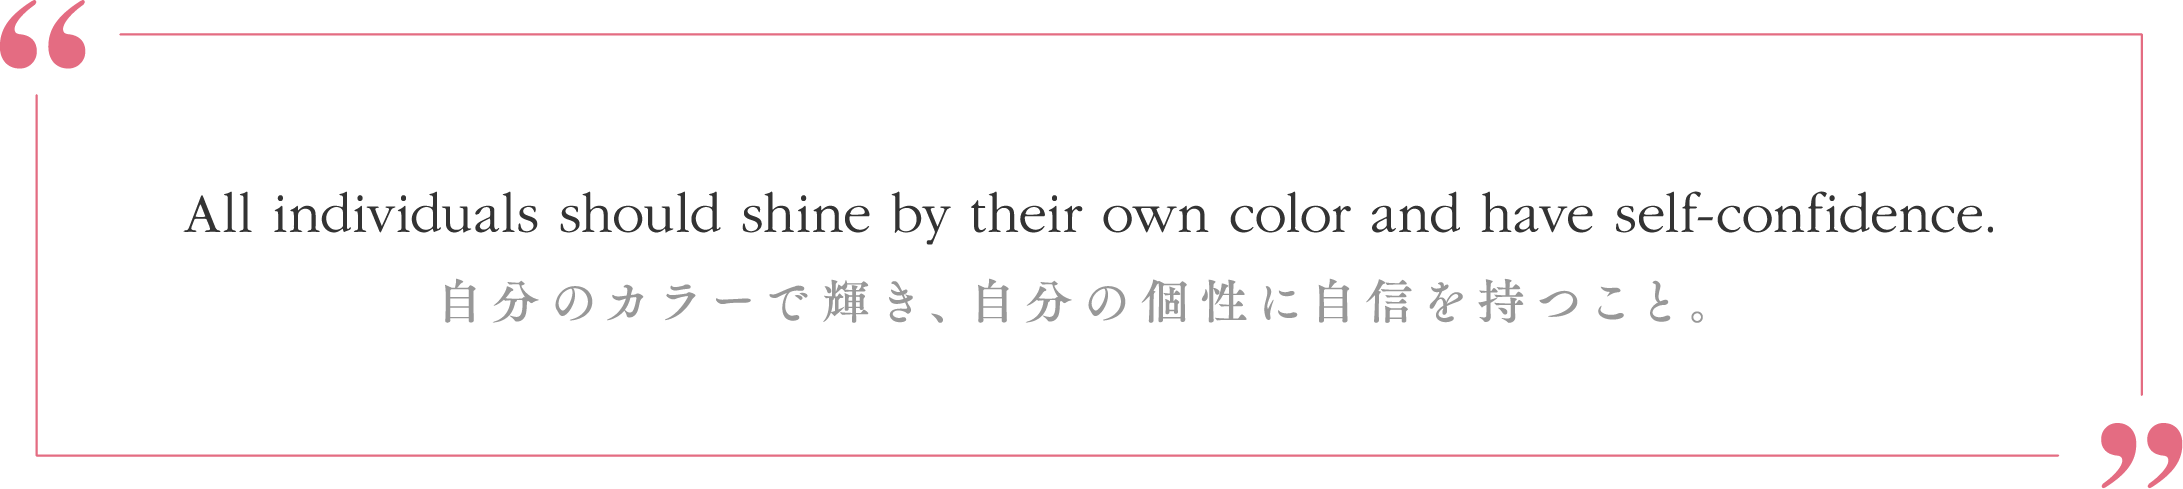 All individuals should shine by their own color and have self-confidence.自分のカラーで輝き、自分の個性に自信を持つこと。